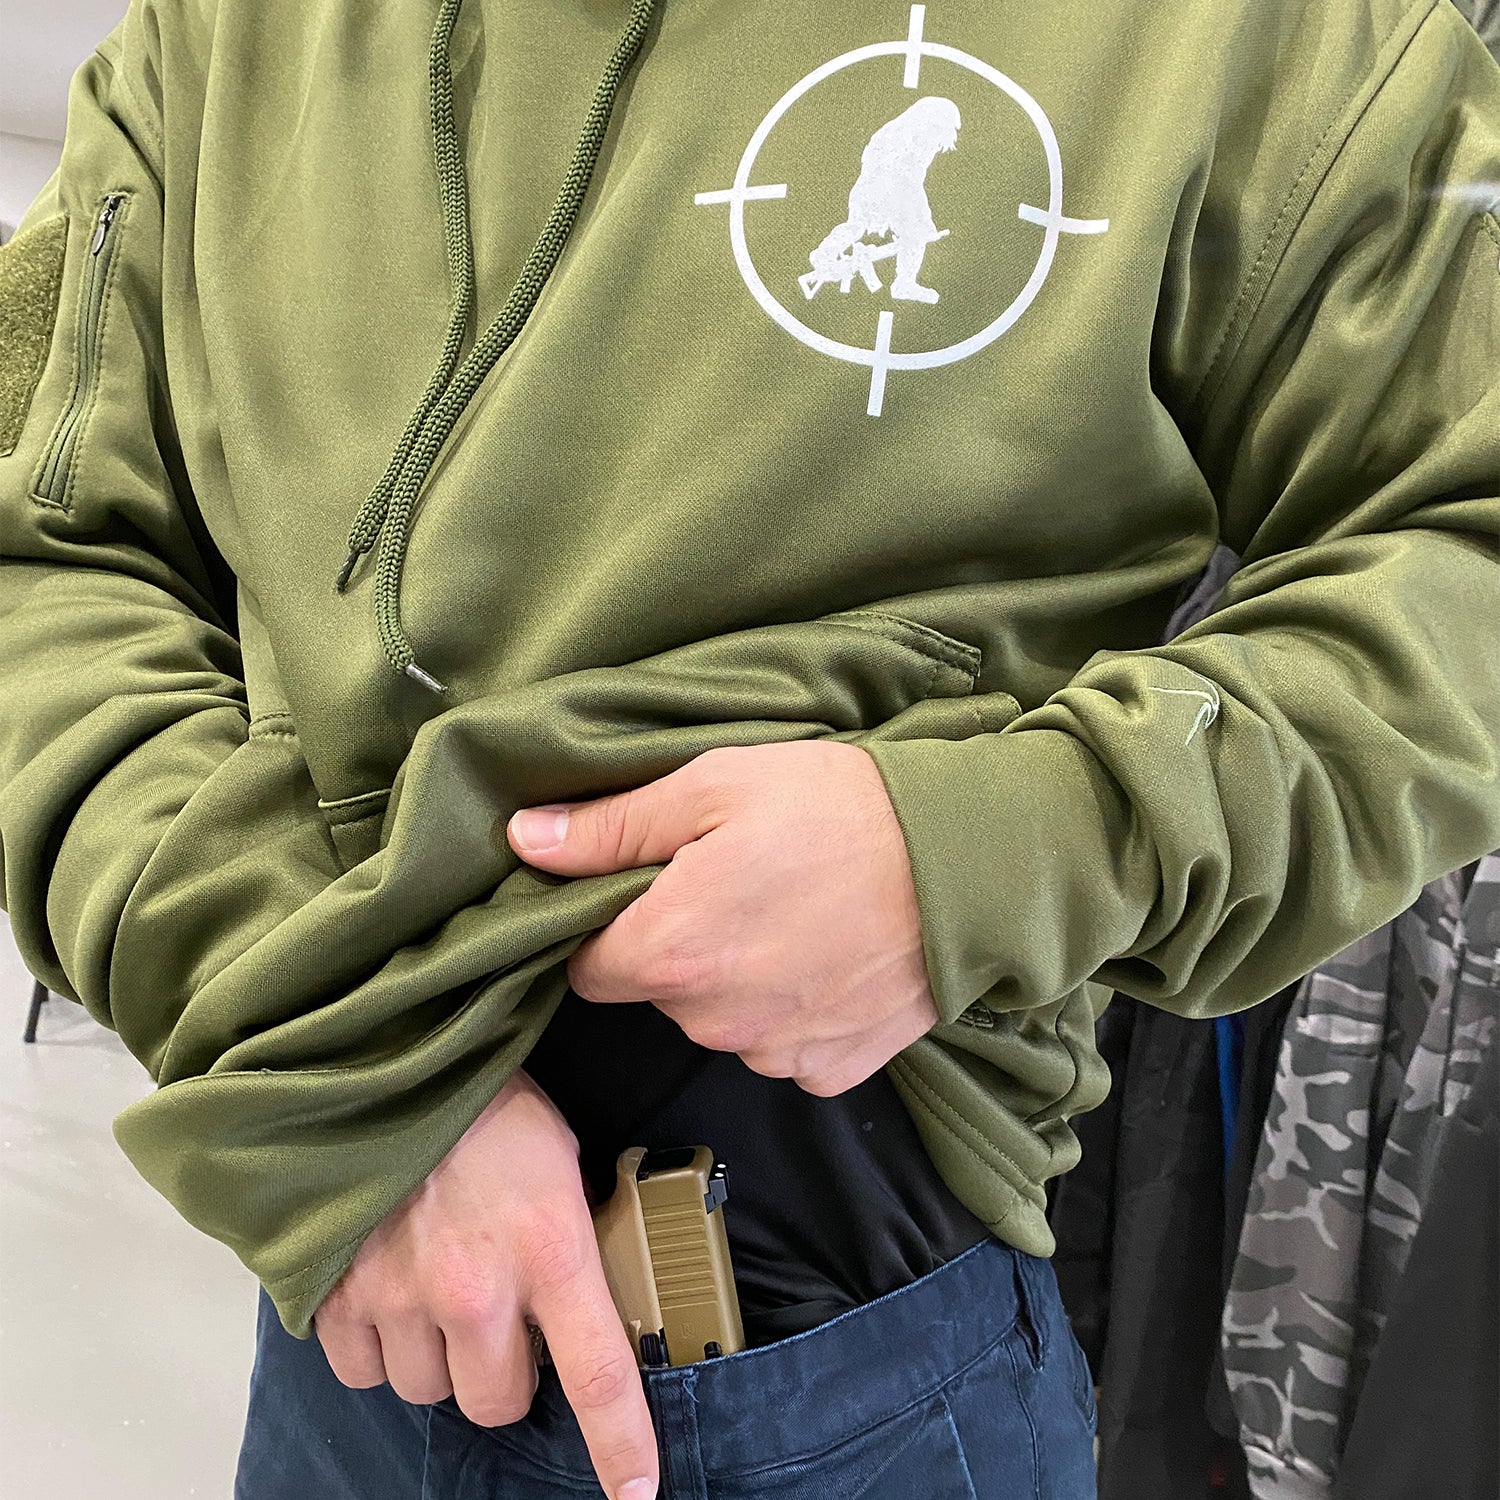 Simple Airsoft x Rothco Concealed Carry Hoodie